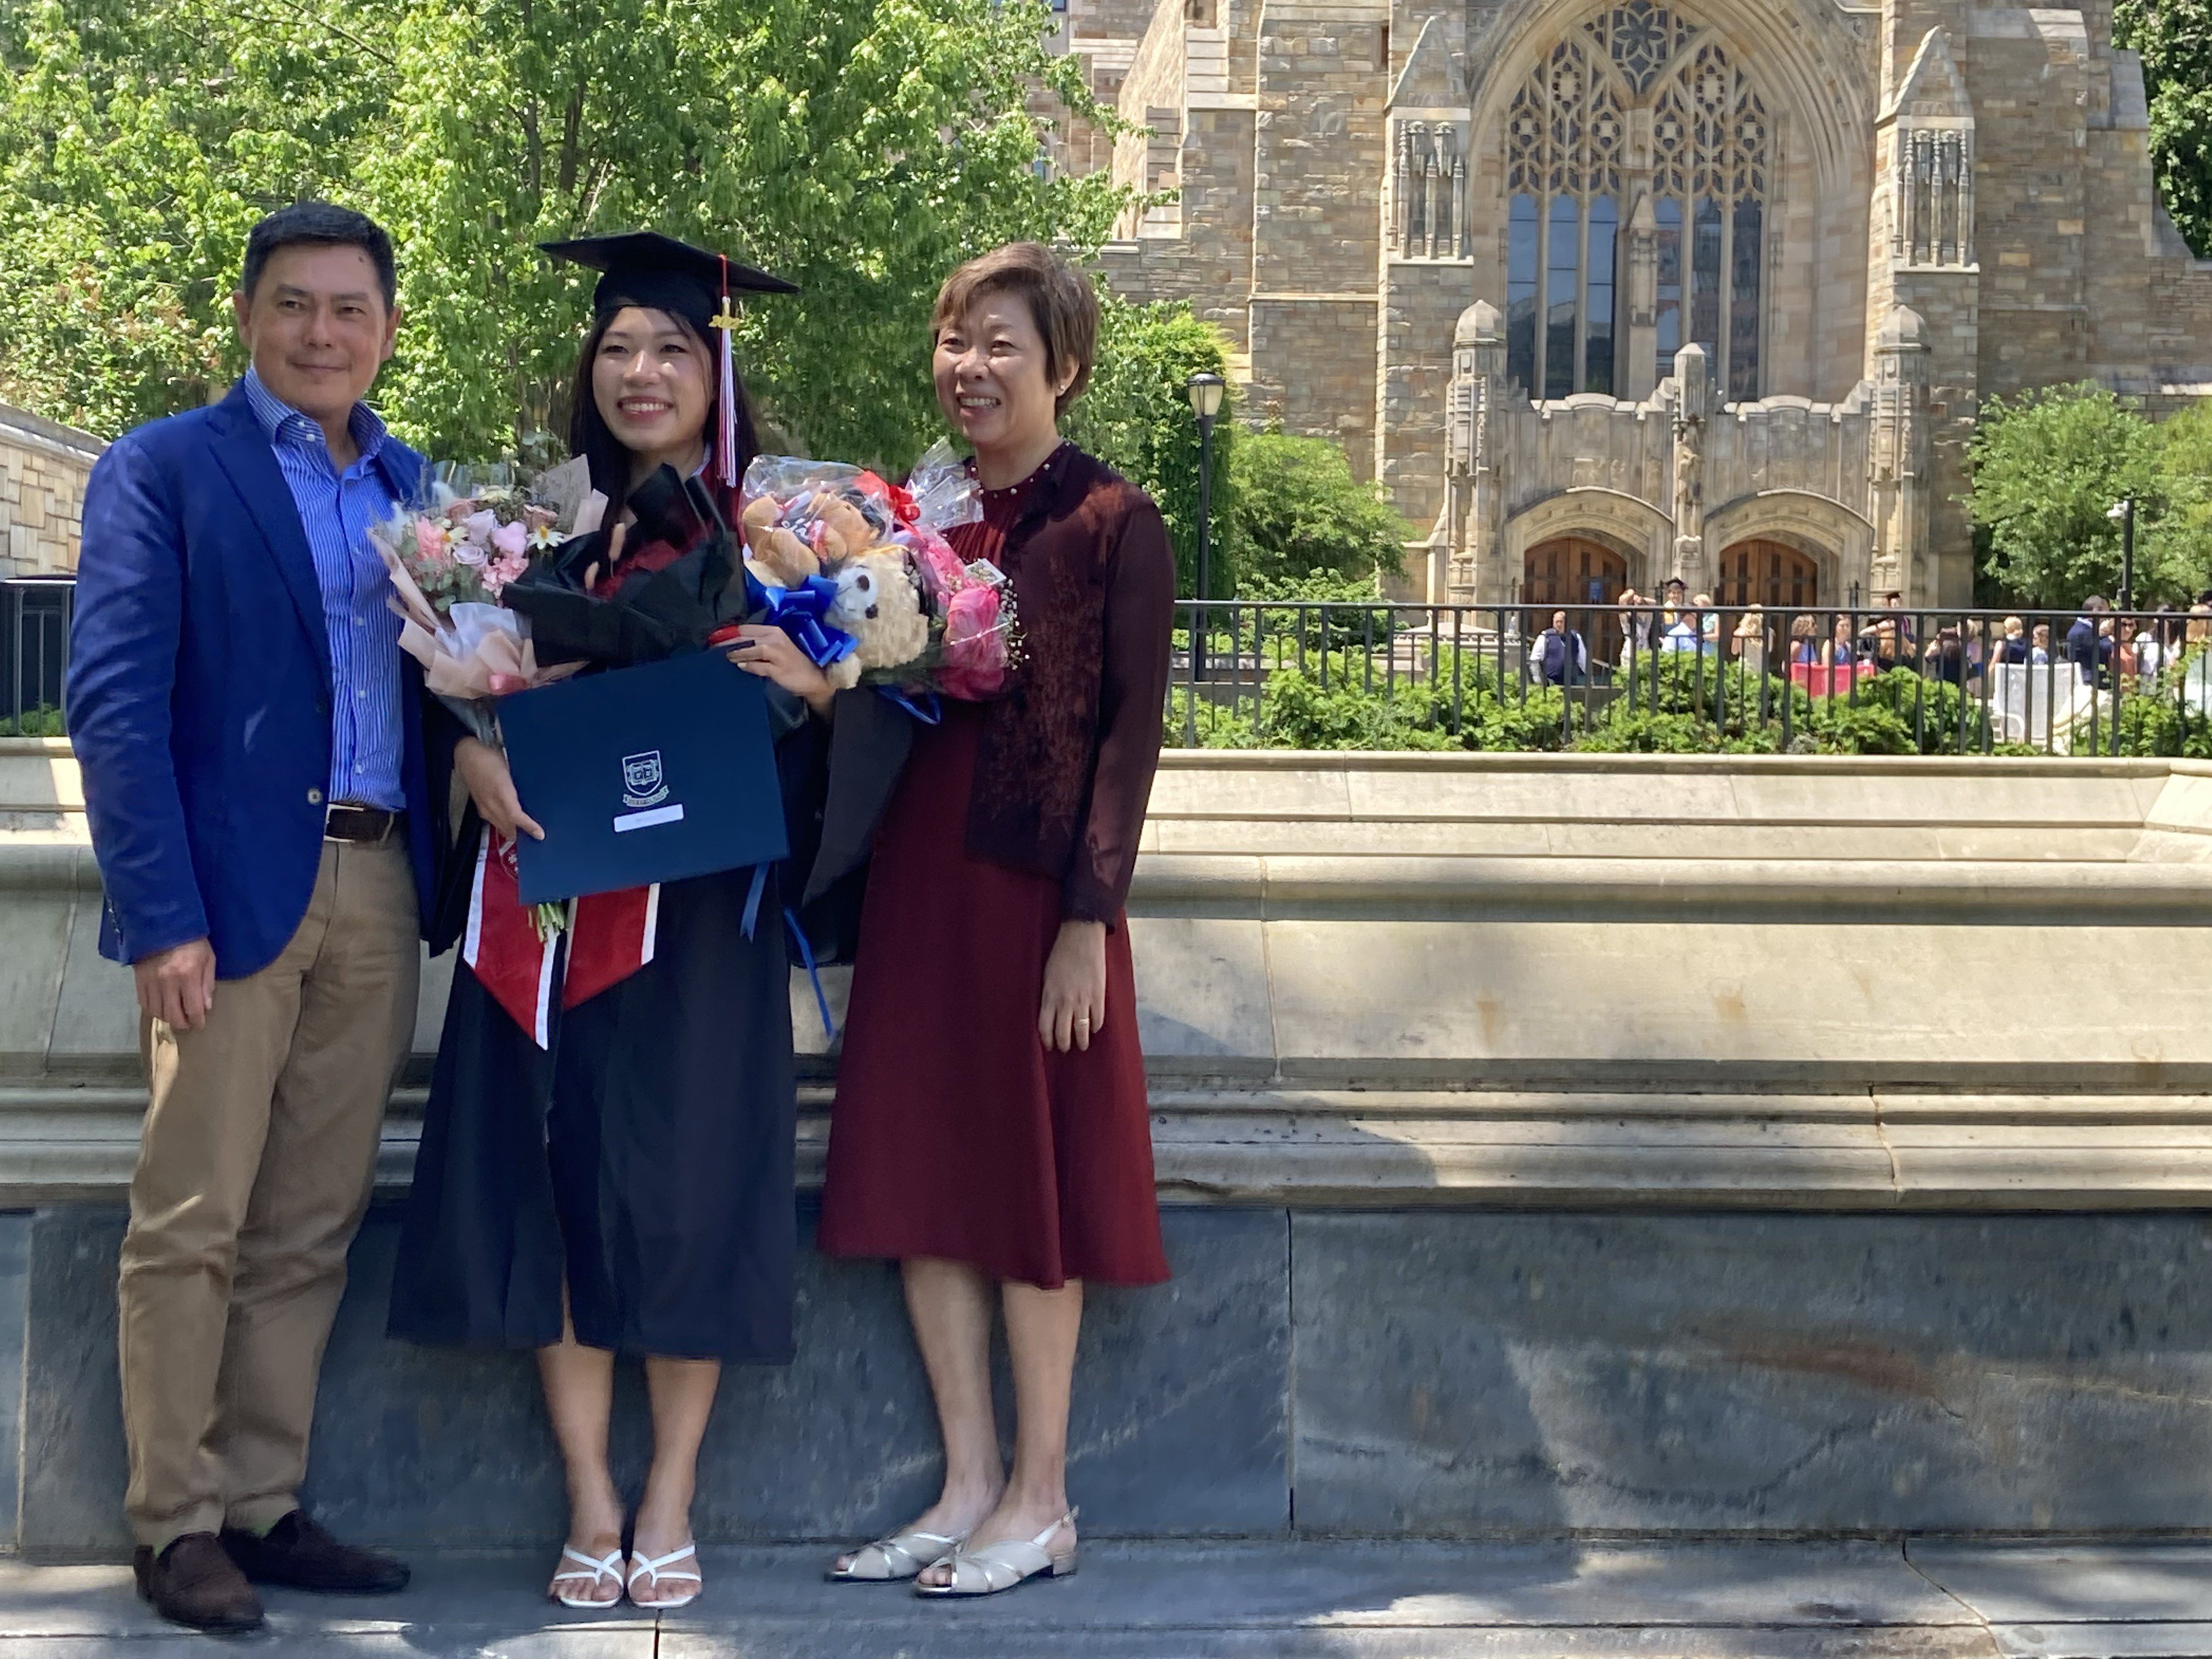 A father, wearing marine blue jacket and blue/white striped shirt, stands next to his graduating daughter. Next to her is her mother, with short brown hair and a burgundy dress and short jacket. The graduate holds three bunches of flowers with bows and teddy bears. She displays the cover of her diploma. The facade of Sterling Library is visible in the background.